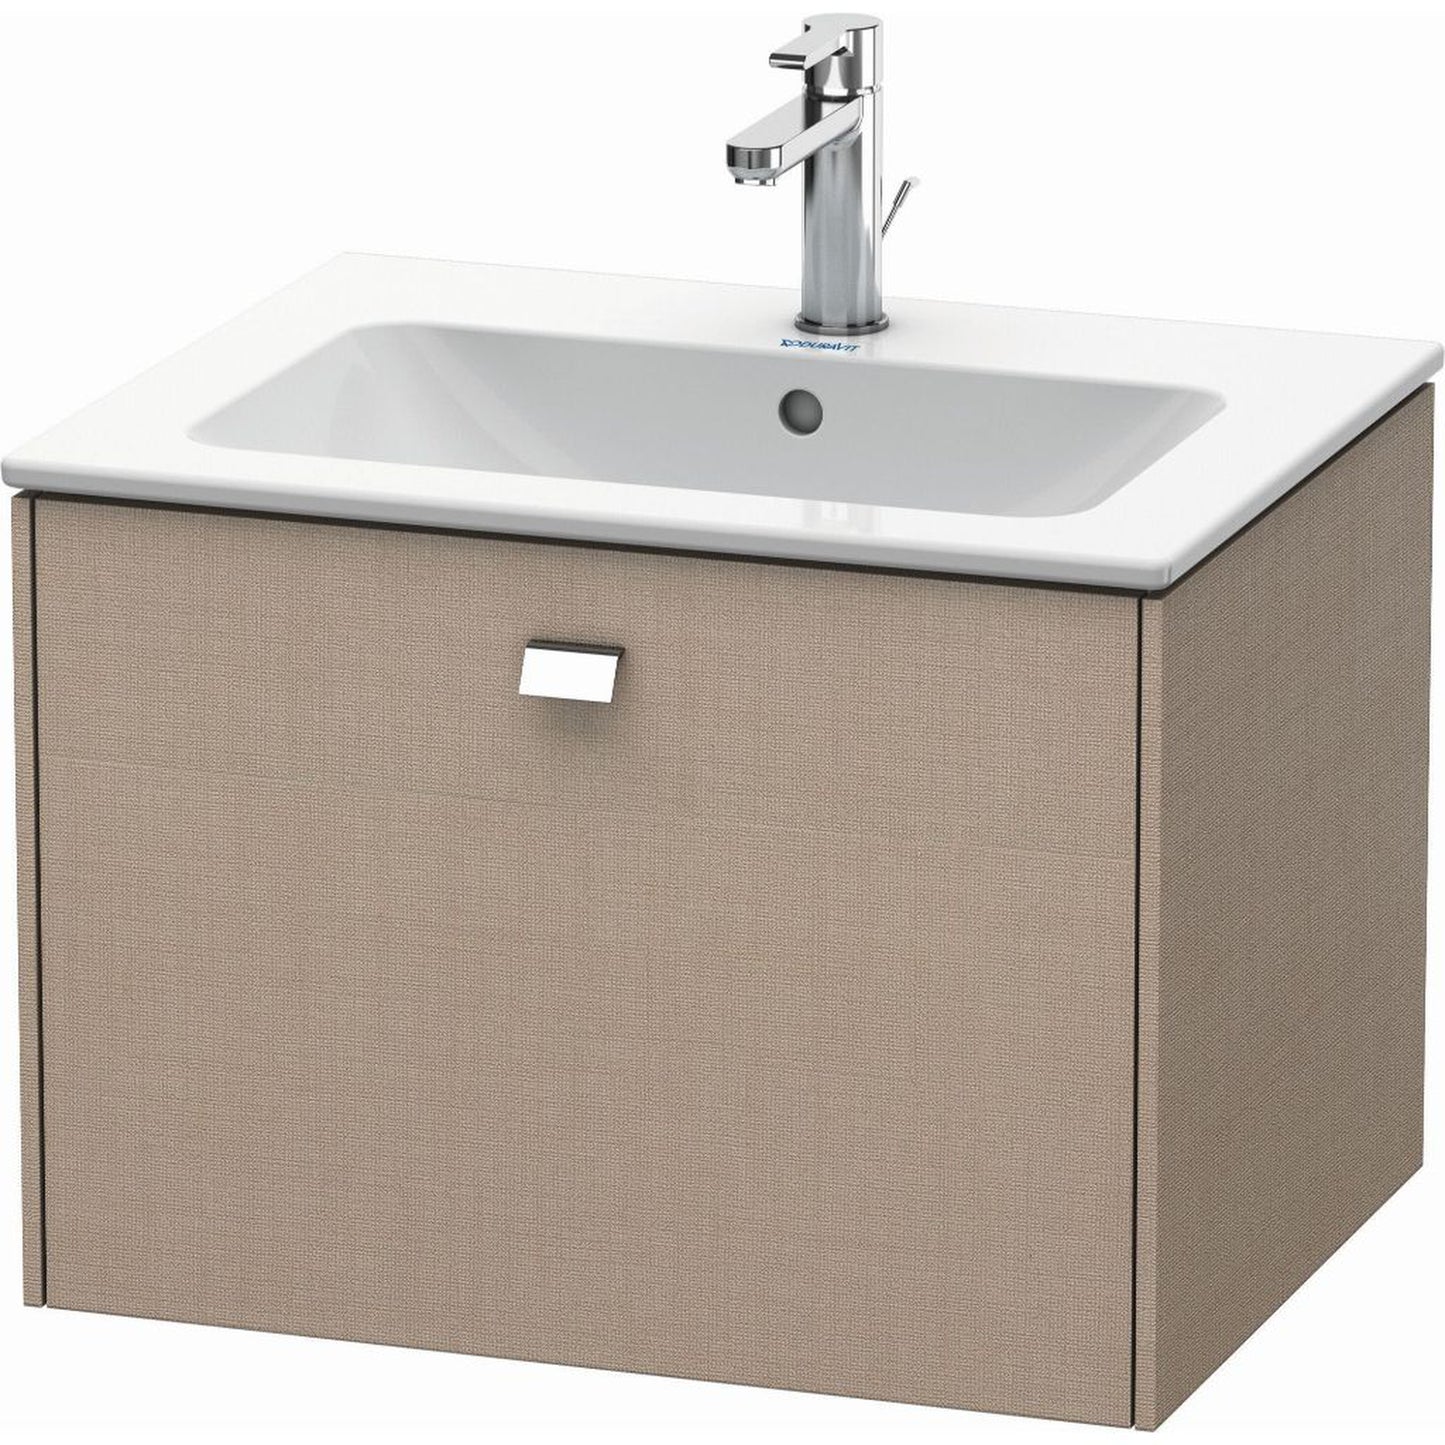 Duravit Brioso 24" x 17" x 19" One Drawer Wall-Mount Vanity Unit in Linen and Chrome Handle